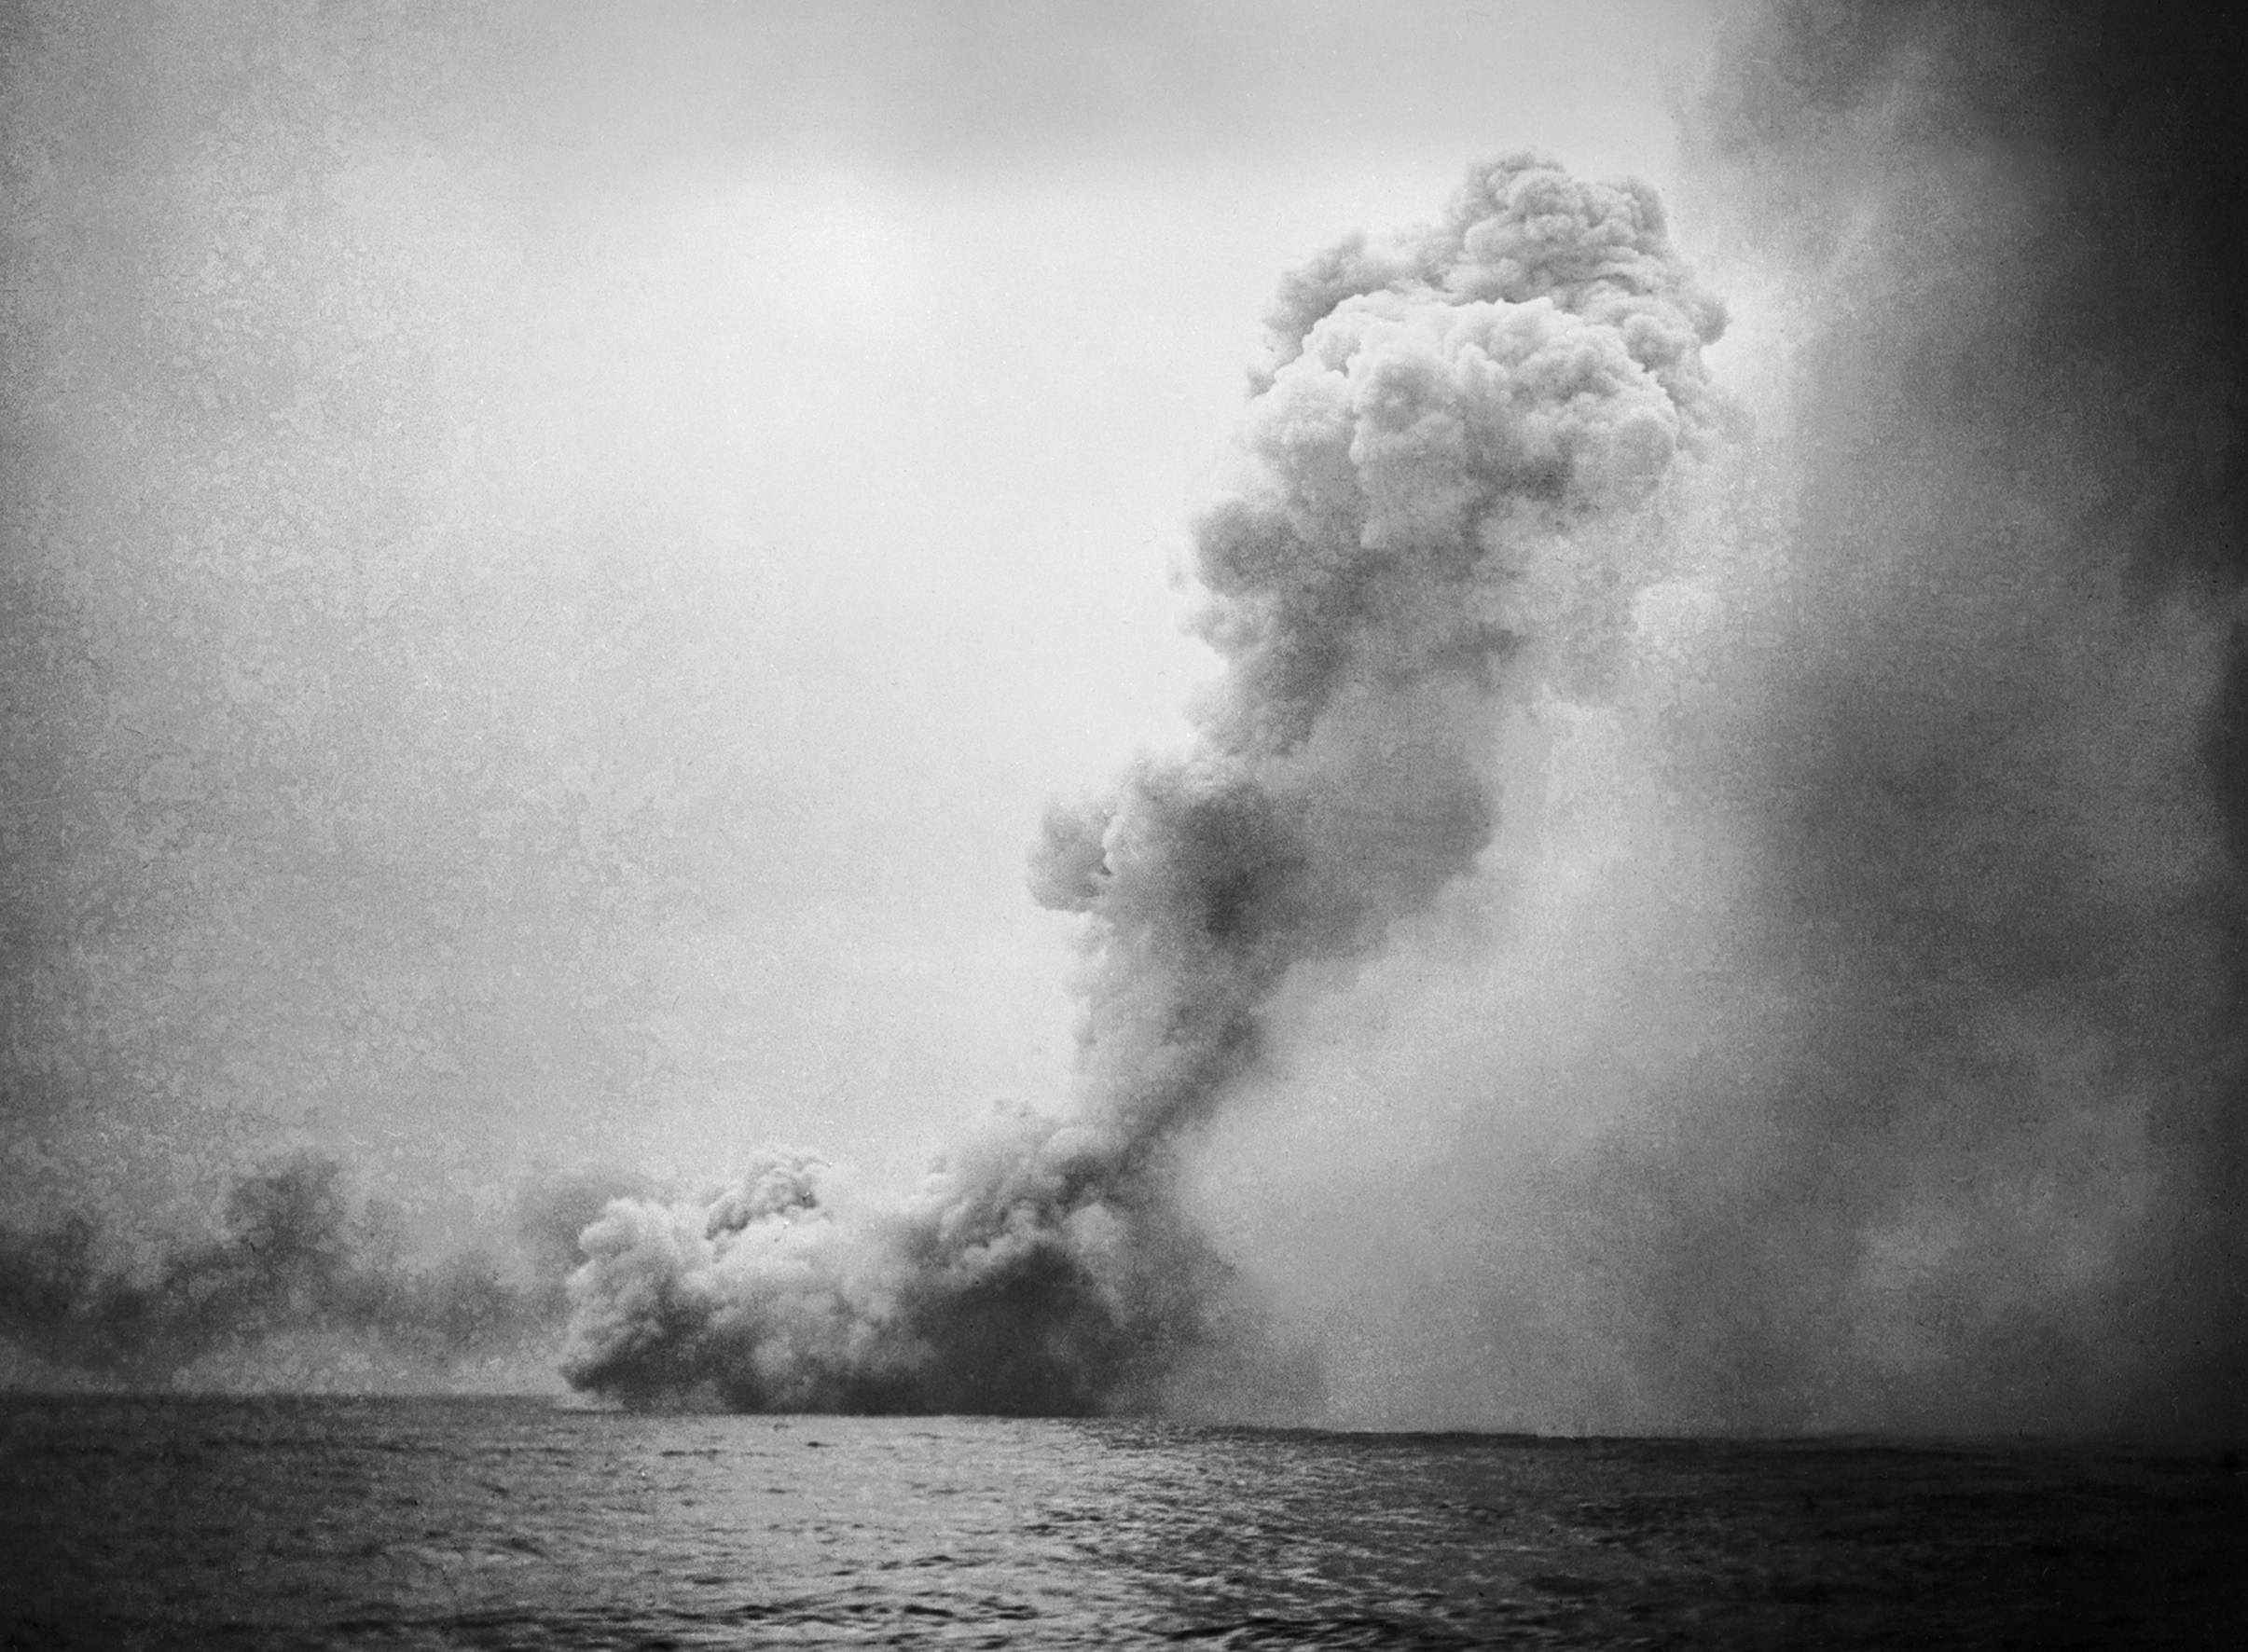 The sinking of HMS Queen Mary at the Battle of Jutland